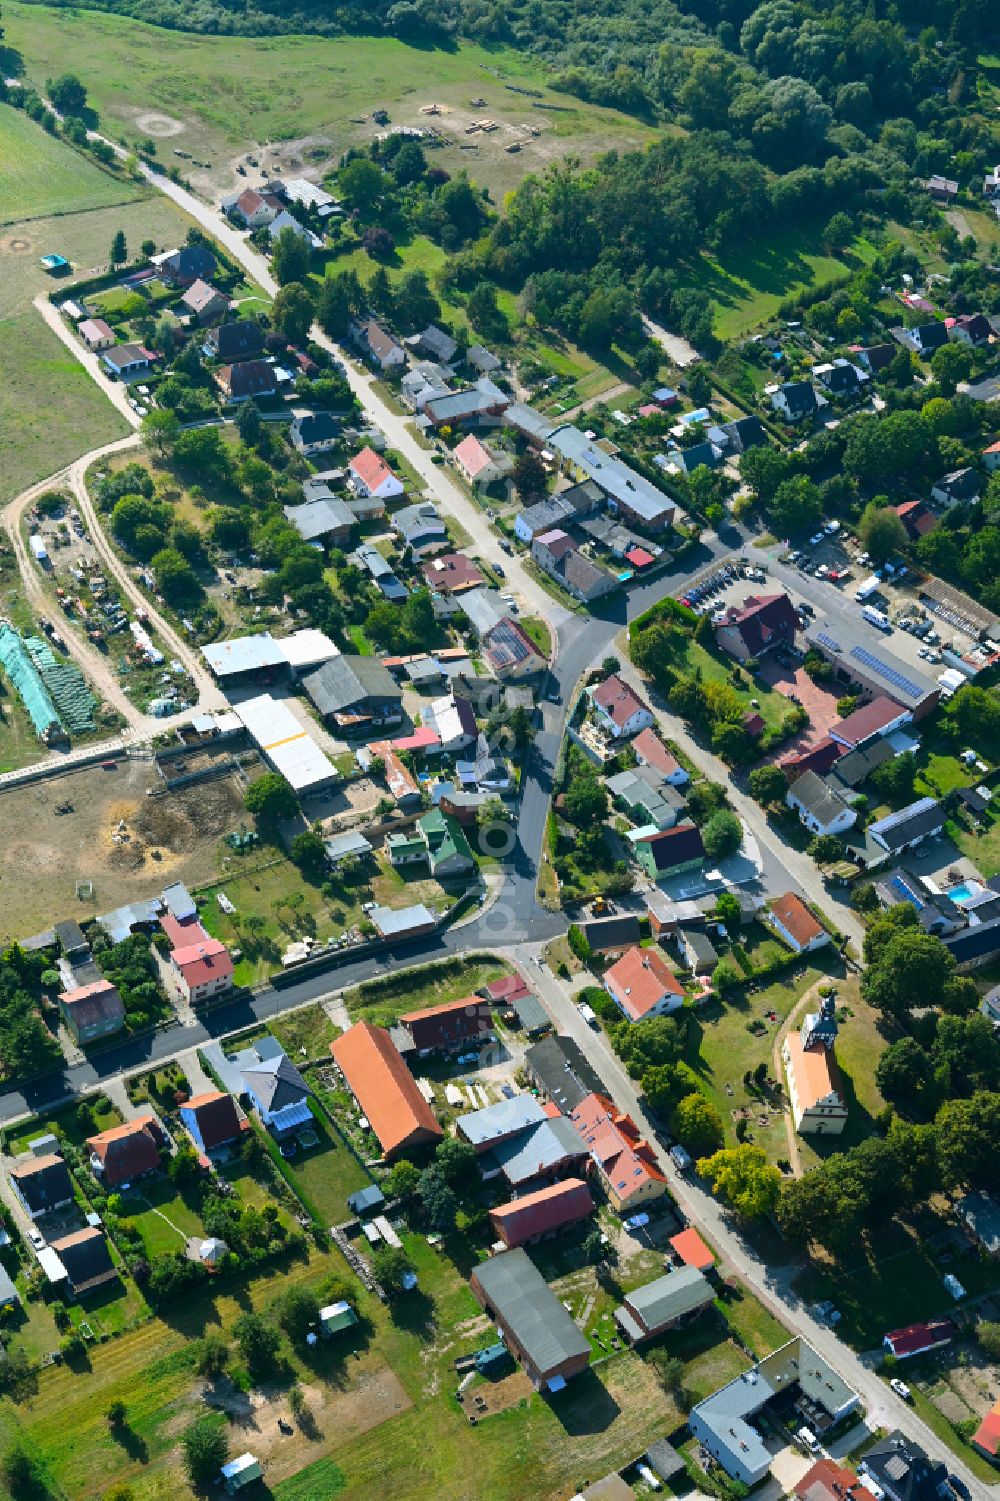 Britz from the bird's eye view: Village view on the edge of agricultural fields and land in Britz in the state Brandenburg, Germany